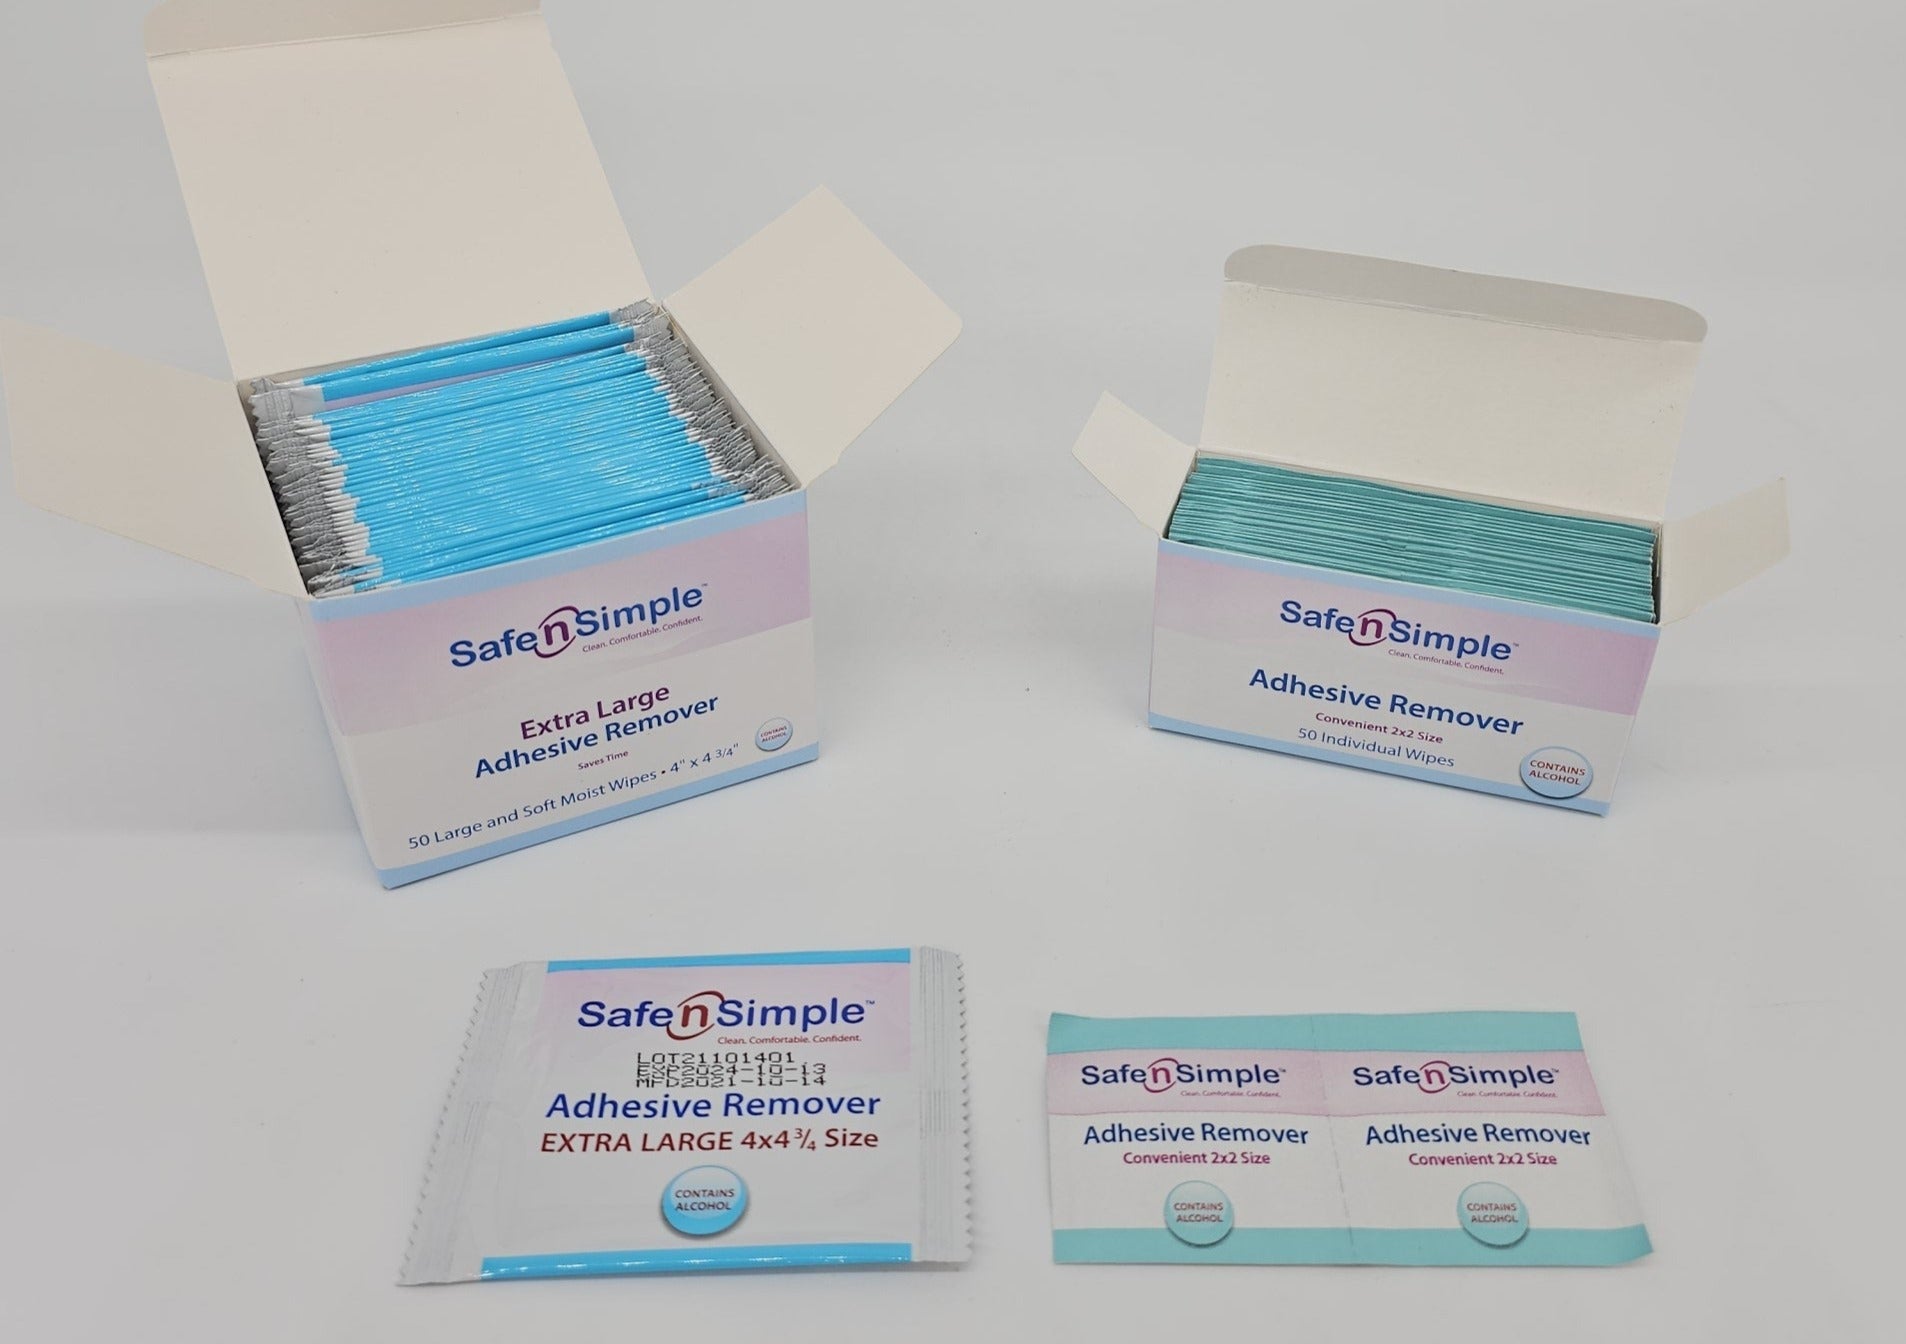 Safe n' Simple Peri-Stoma Adhesive Remover Wipes: 5 x 7, 50